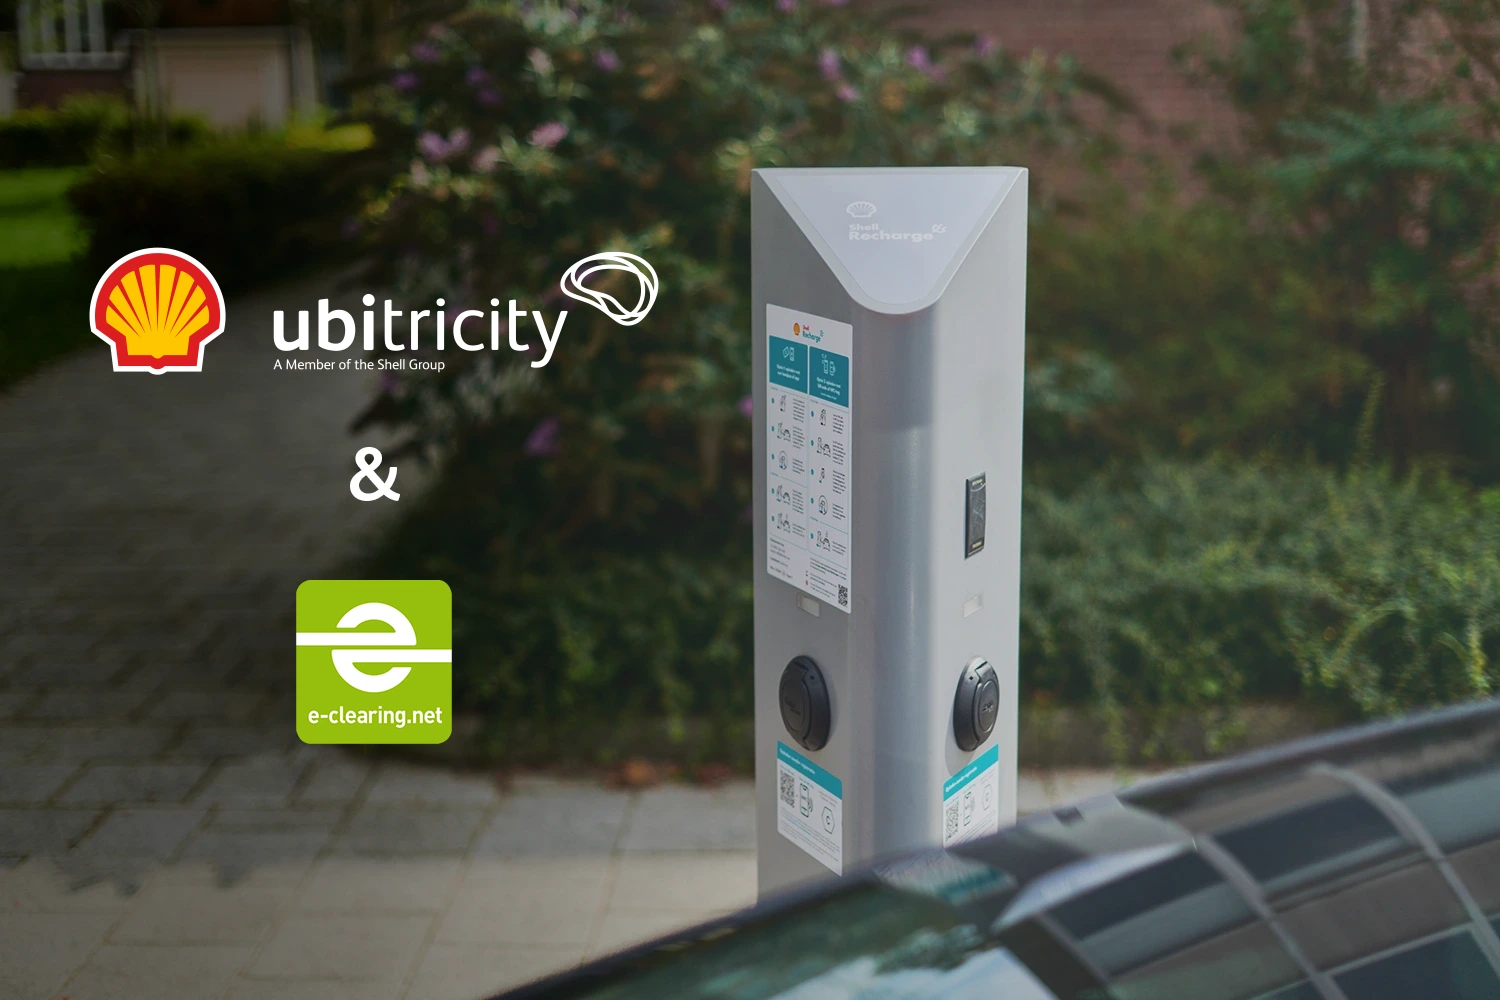 ubitricity and e-clearing.net forge partnership in e-mobility